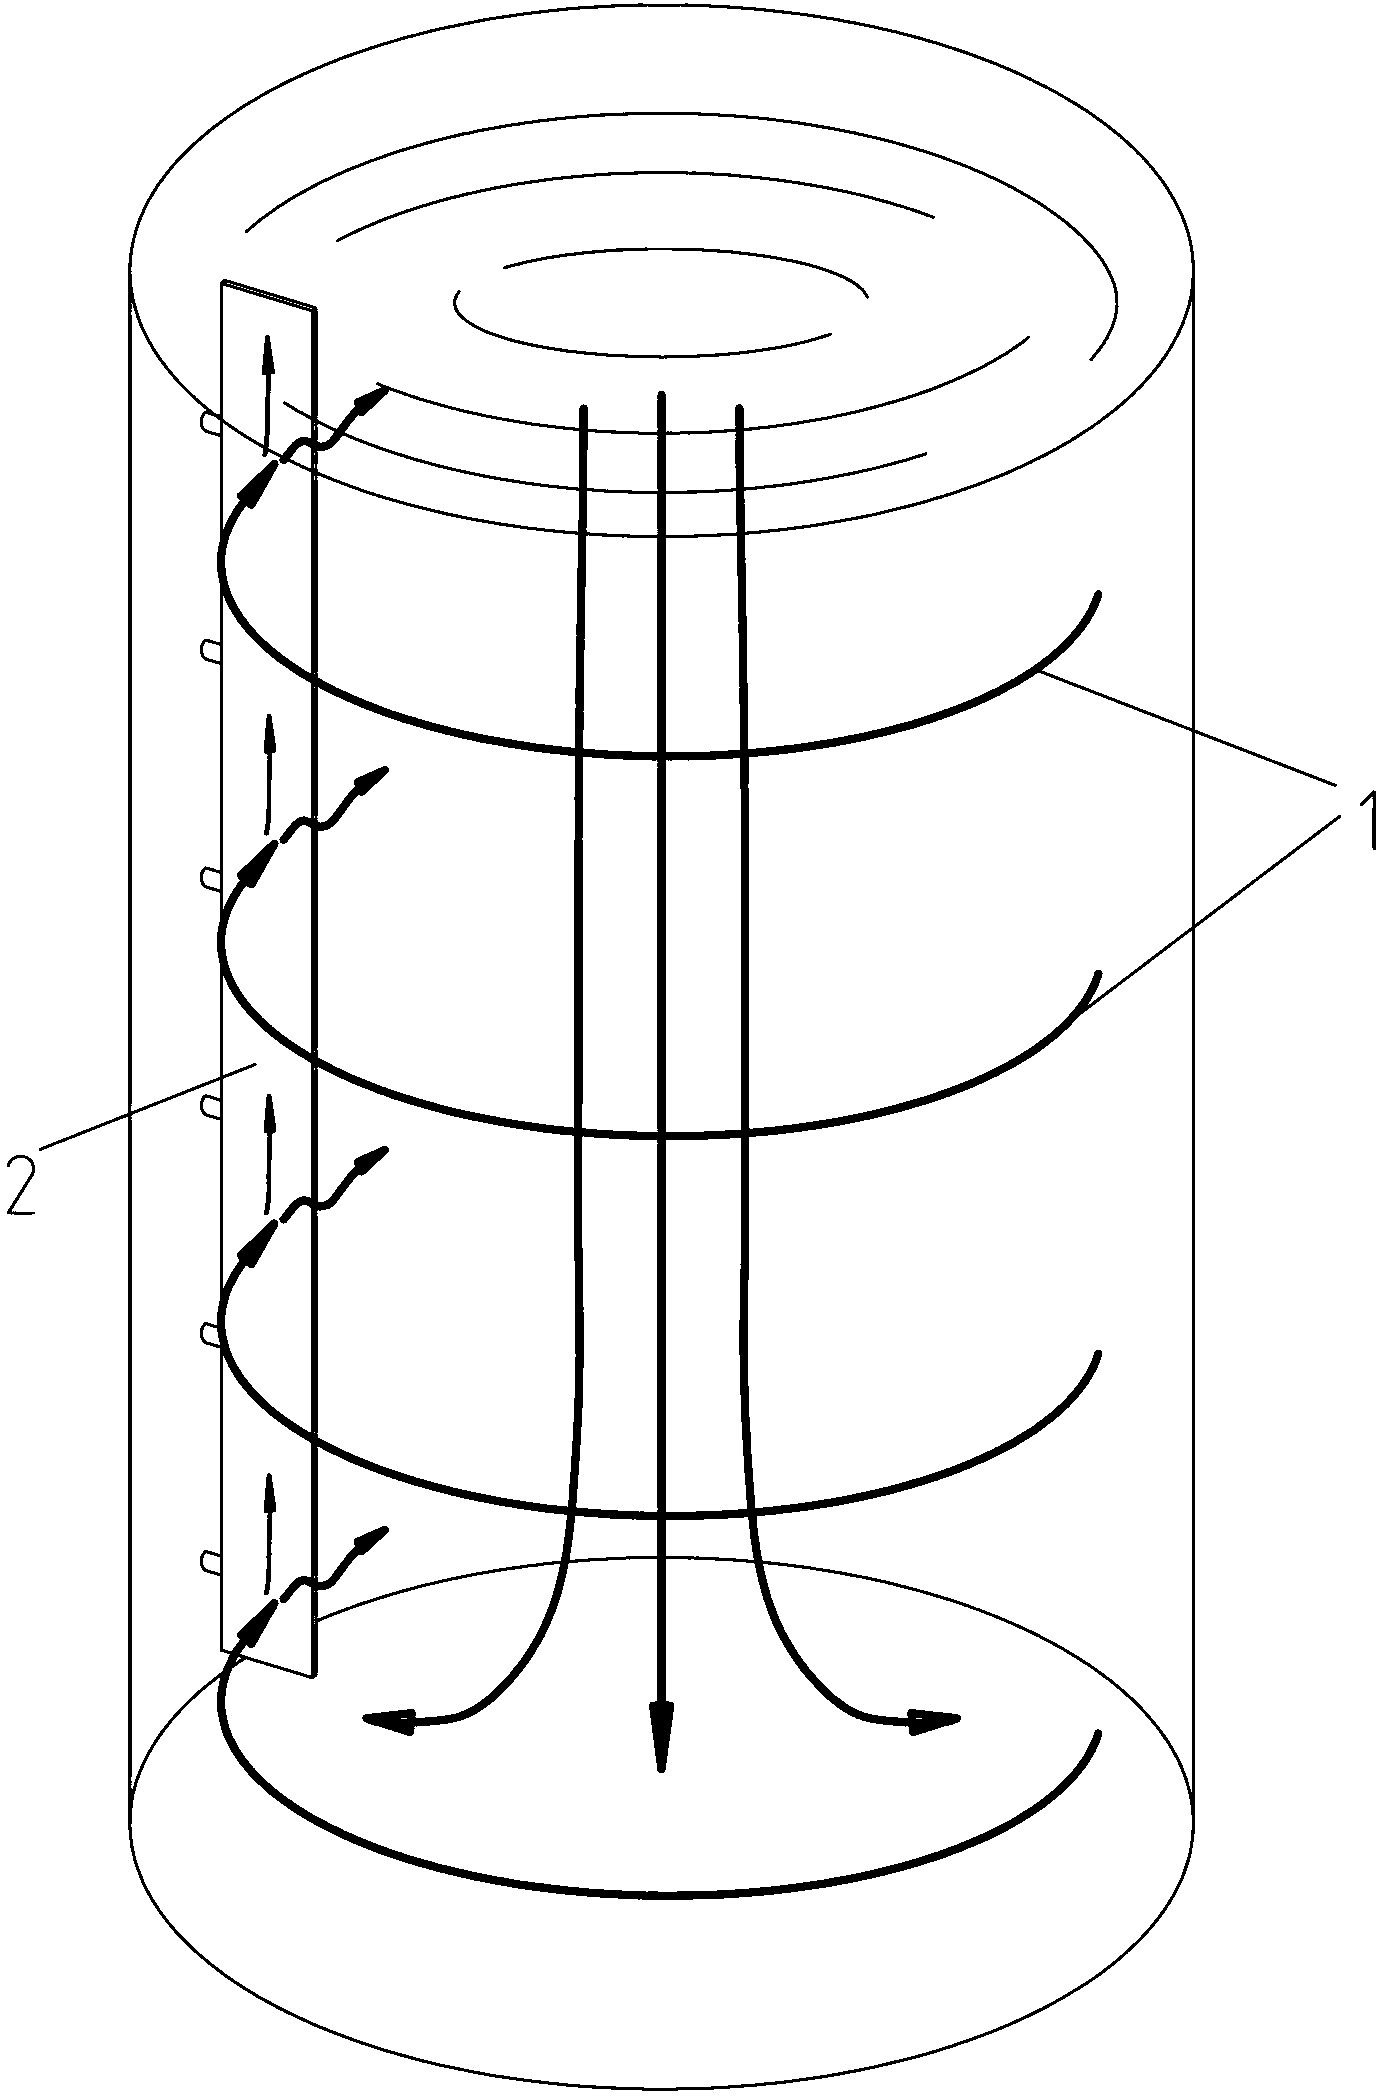 Stirred tank with baffle plates capable of reducing accumulating materials at tank bottom